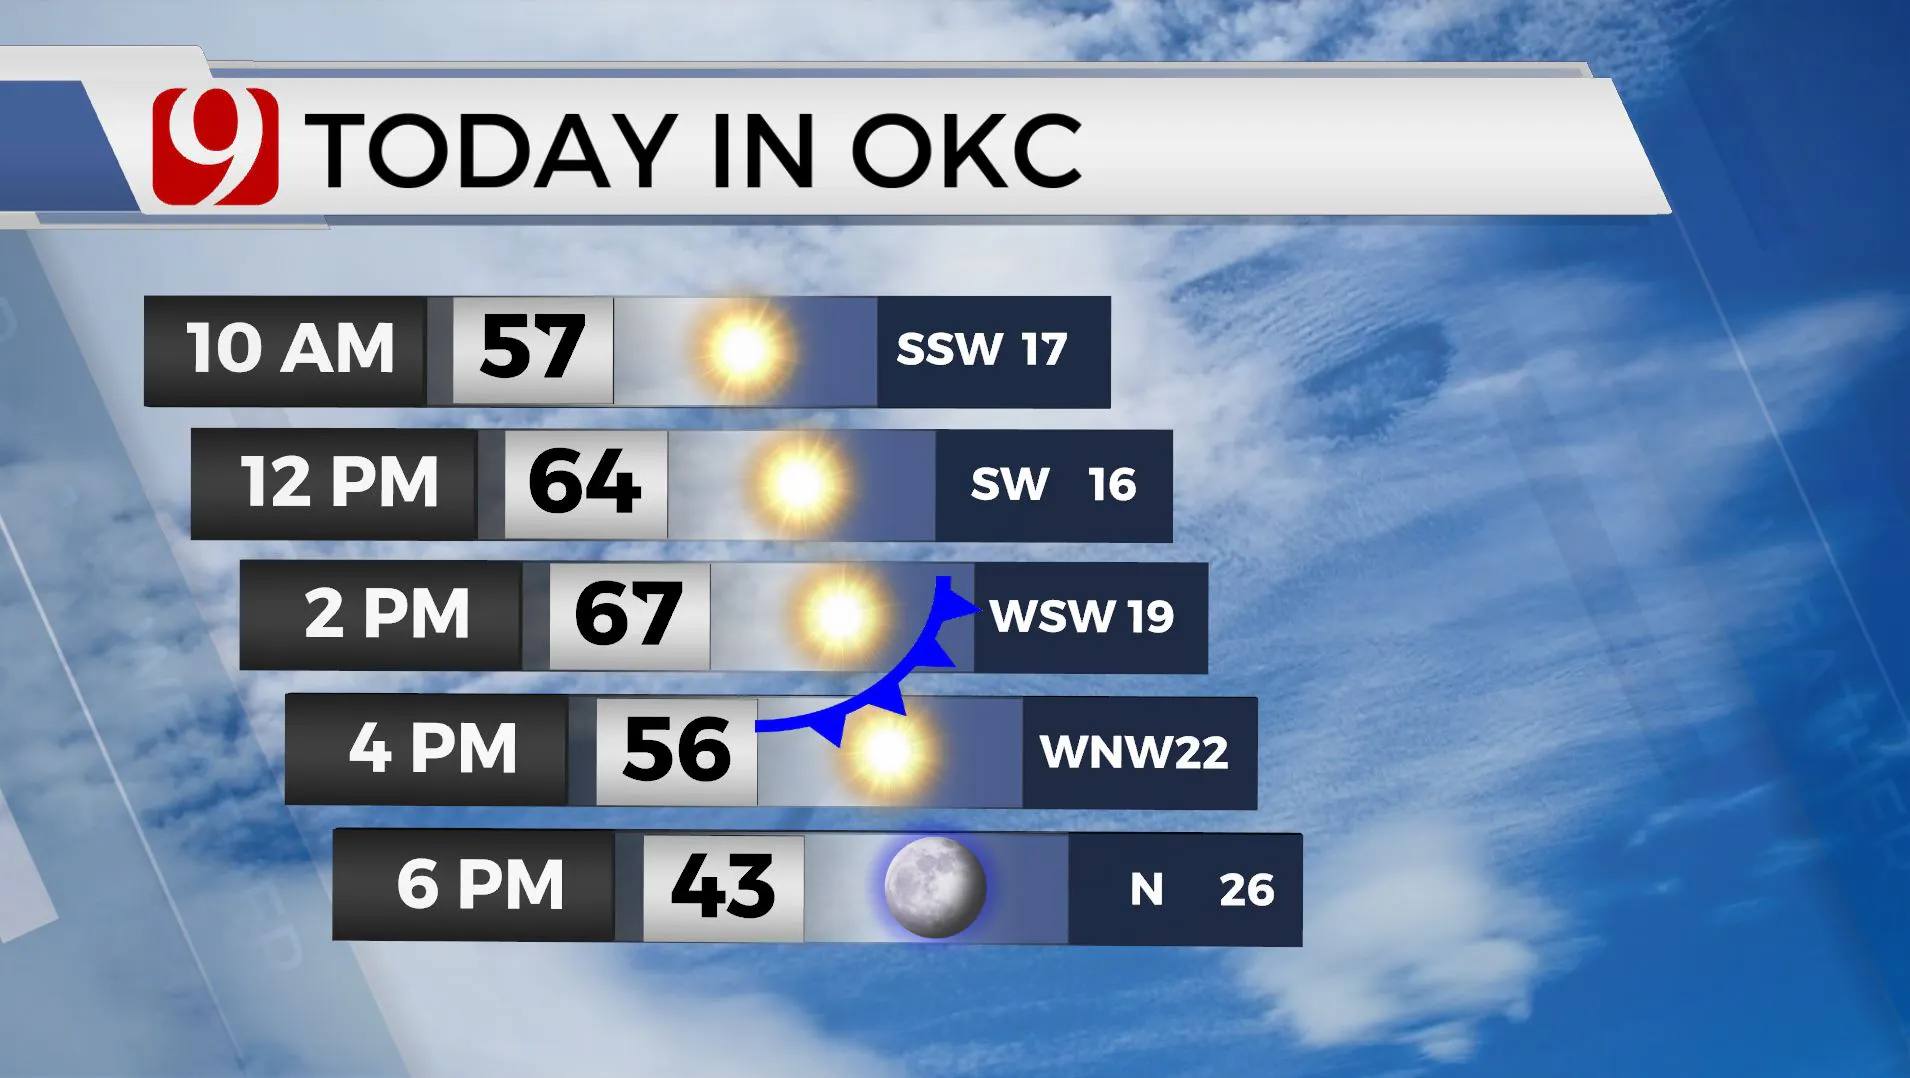 Temps and wind in OKC on Tuesday.